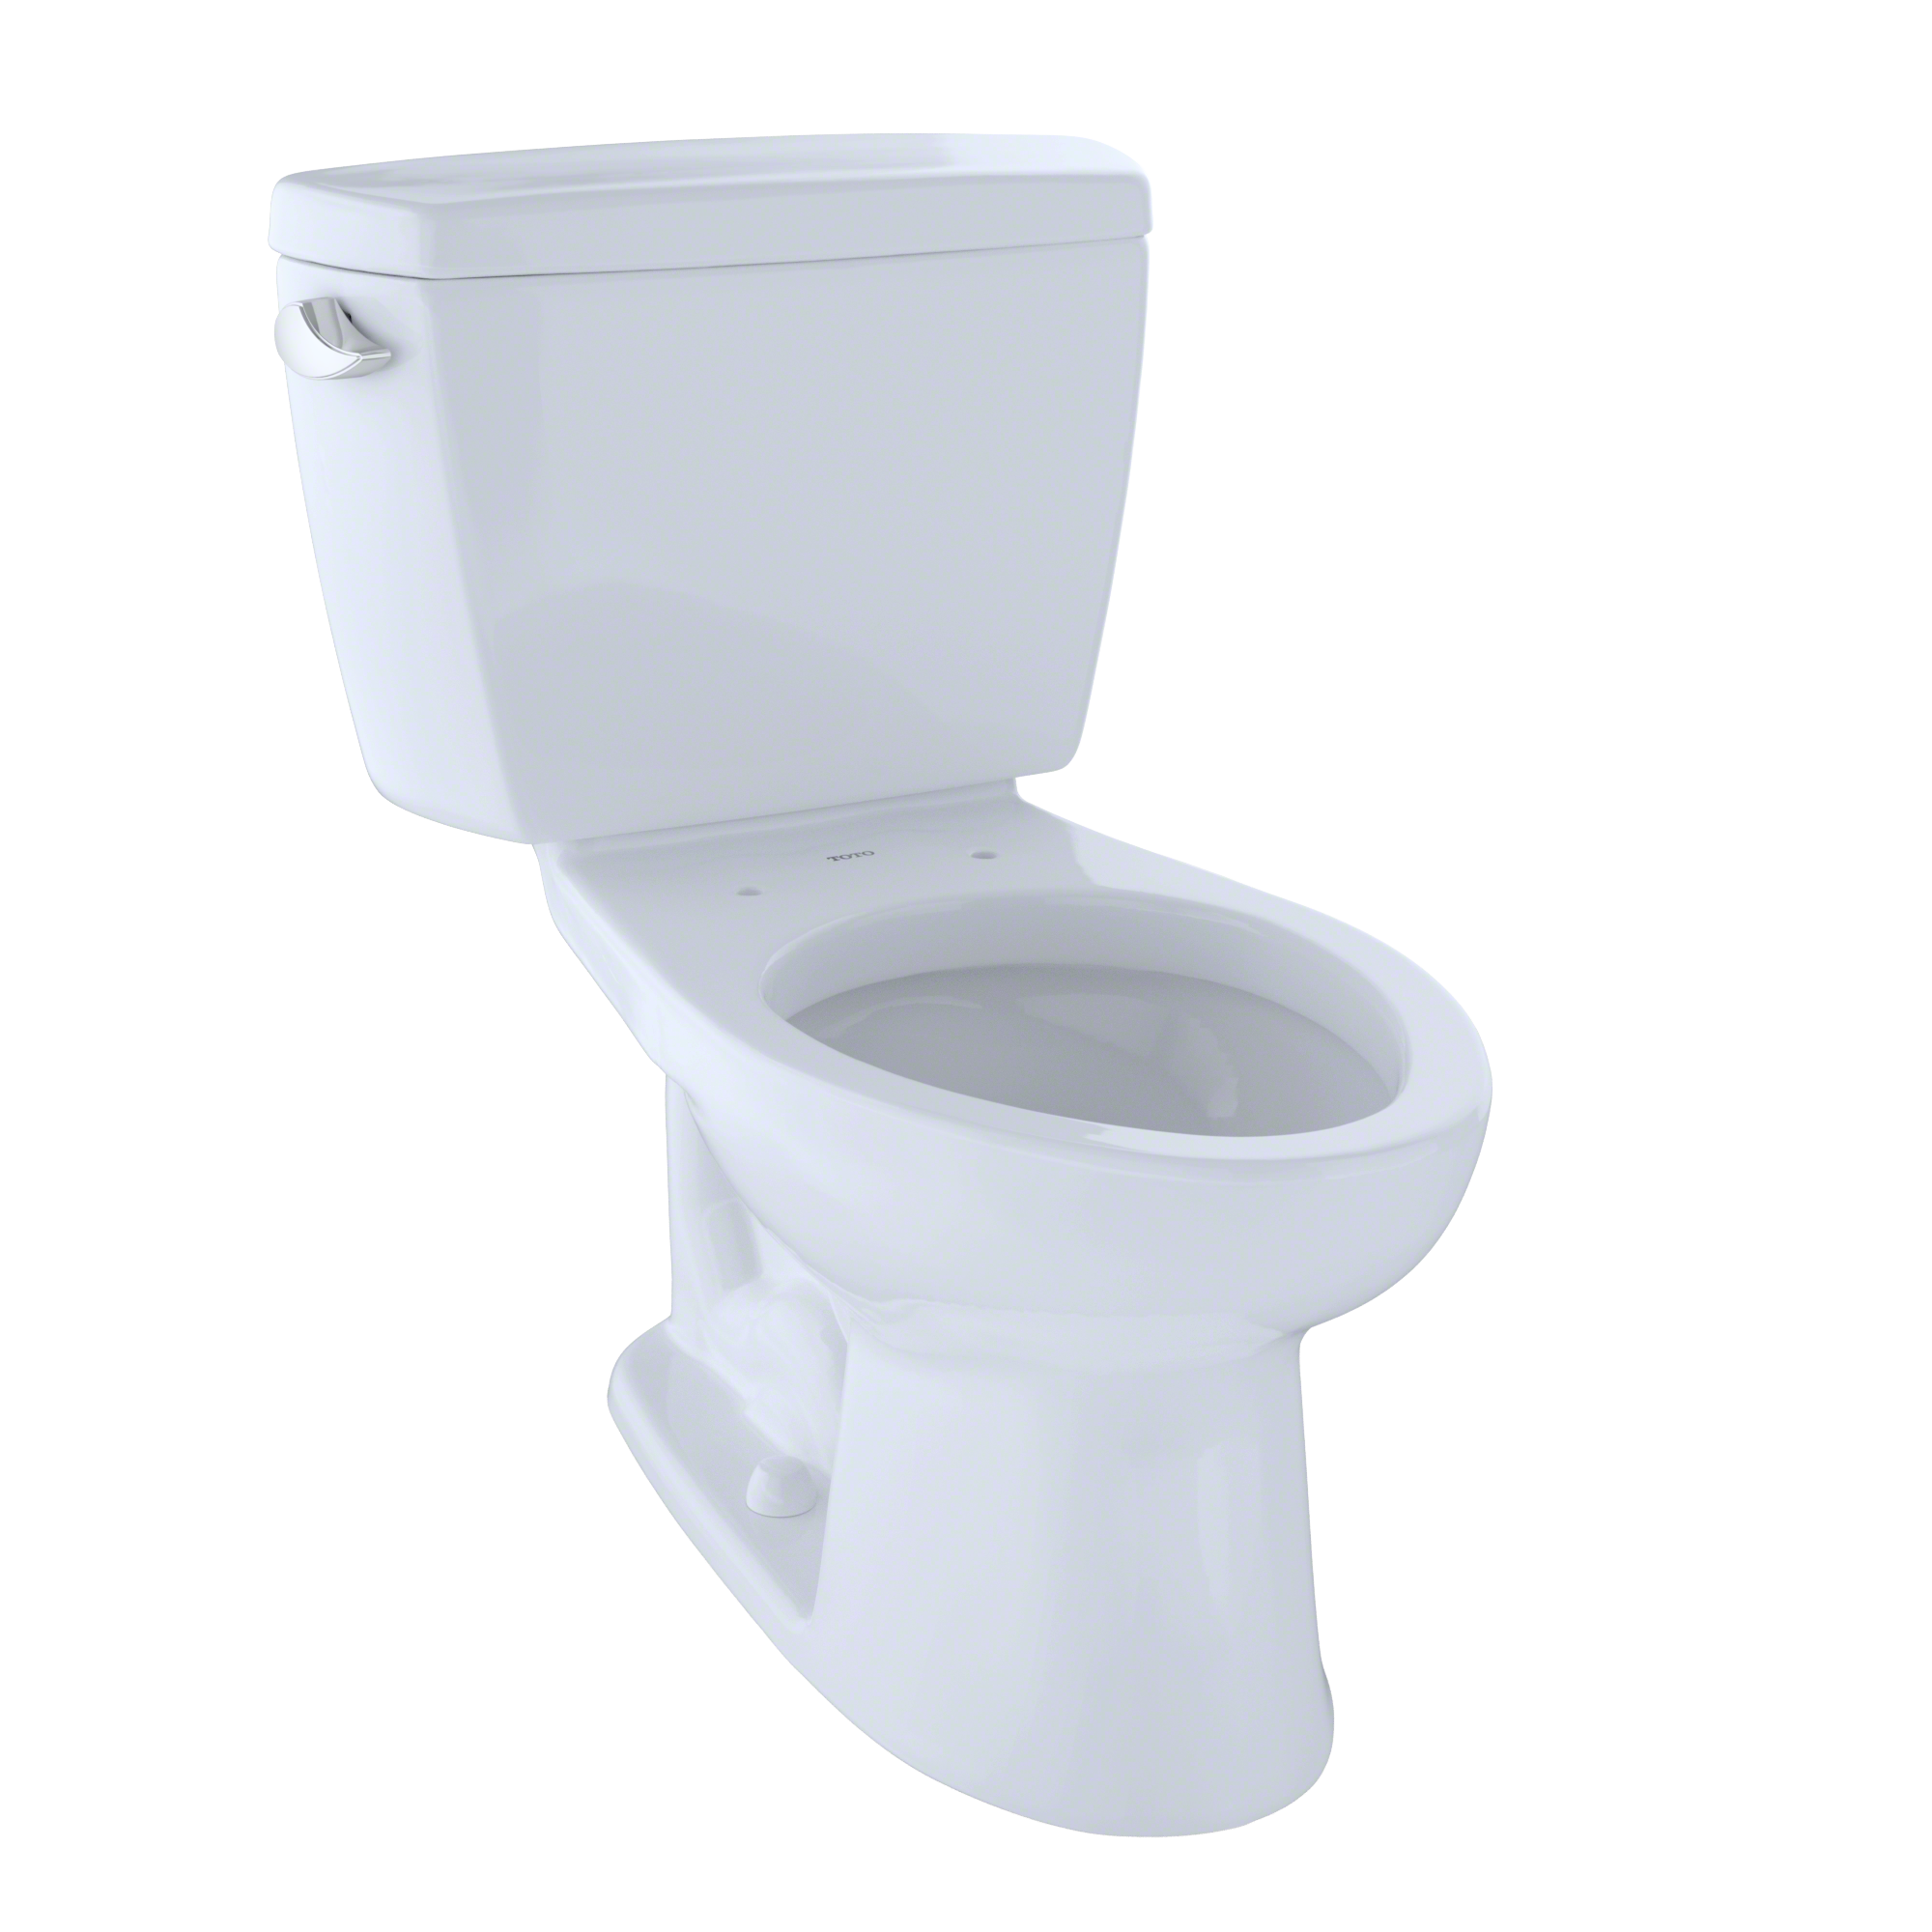 TOTOÂ® Eco DrakeÂ® Two-Piece Elongated 1.28 GPF Universal Height Toilet for 10 Inch Rough-In, Cotton White - CST744EF.10#01 - image 1 of 2